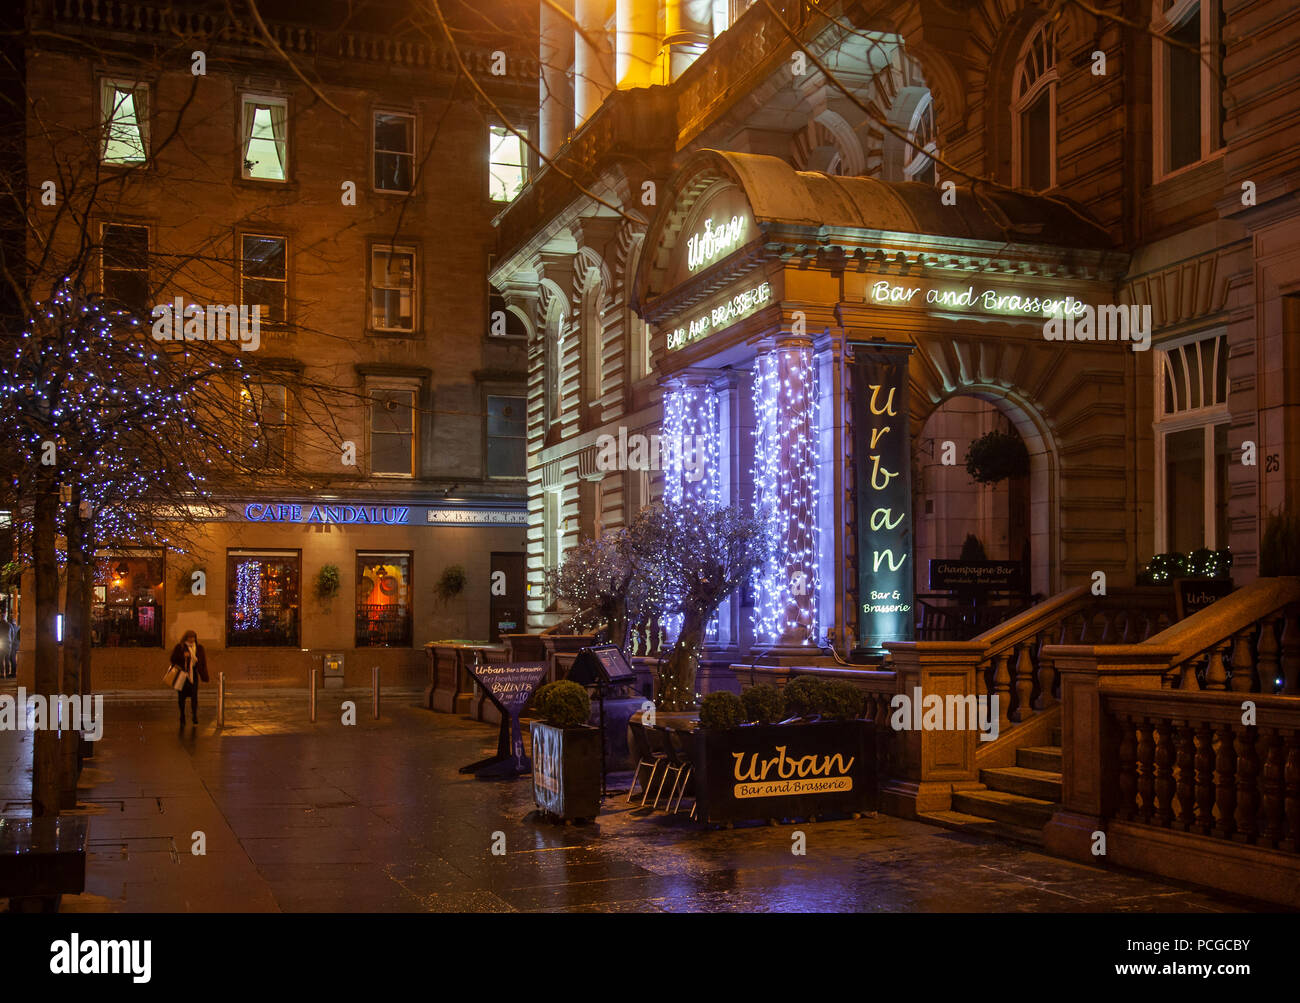 Exterior of Urban, a bar and brasserie in central Glasgow with fairy lights on a wet, winter evening. Cafe Andaluz tapas bar. Scotland, UK Stock Photo